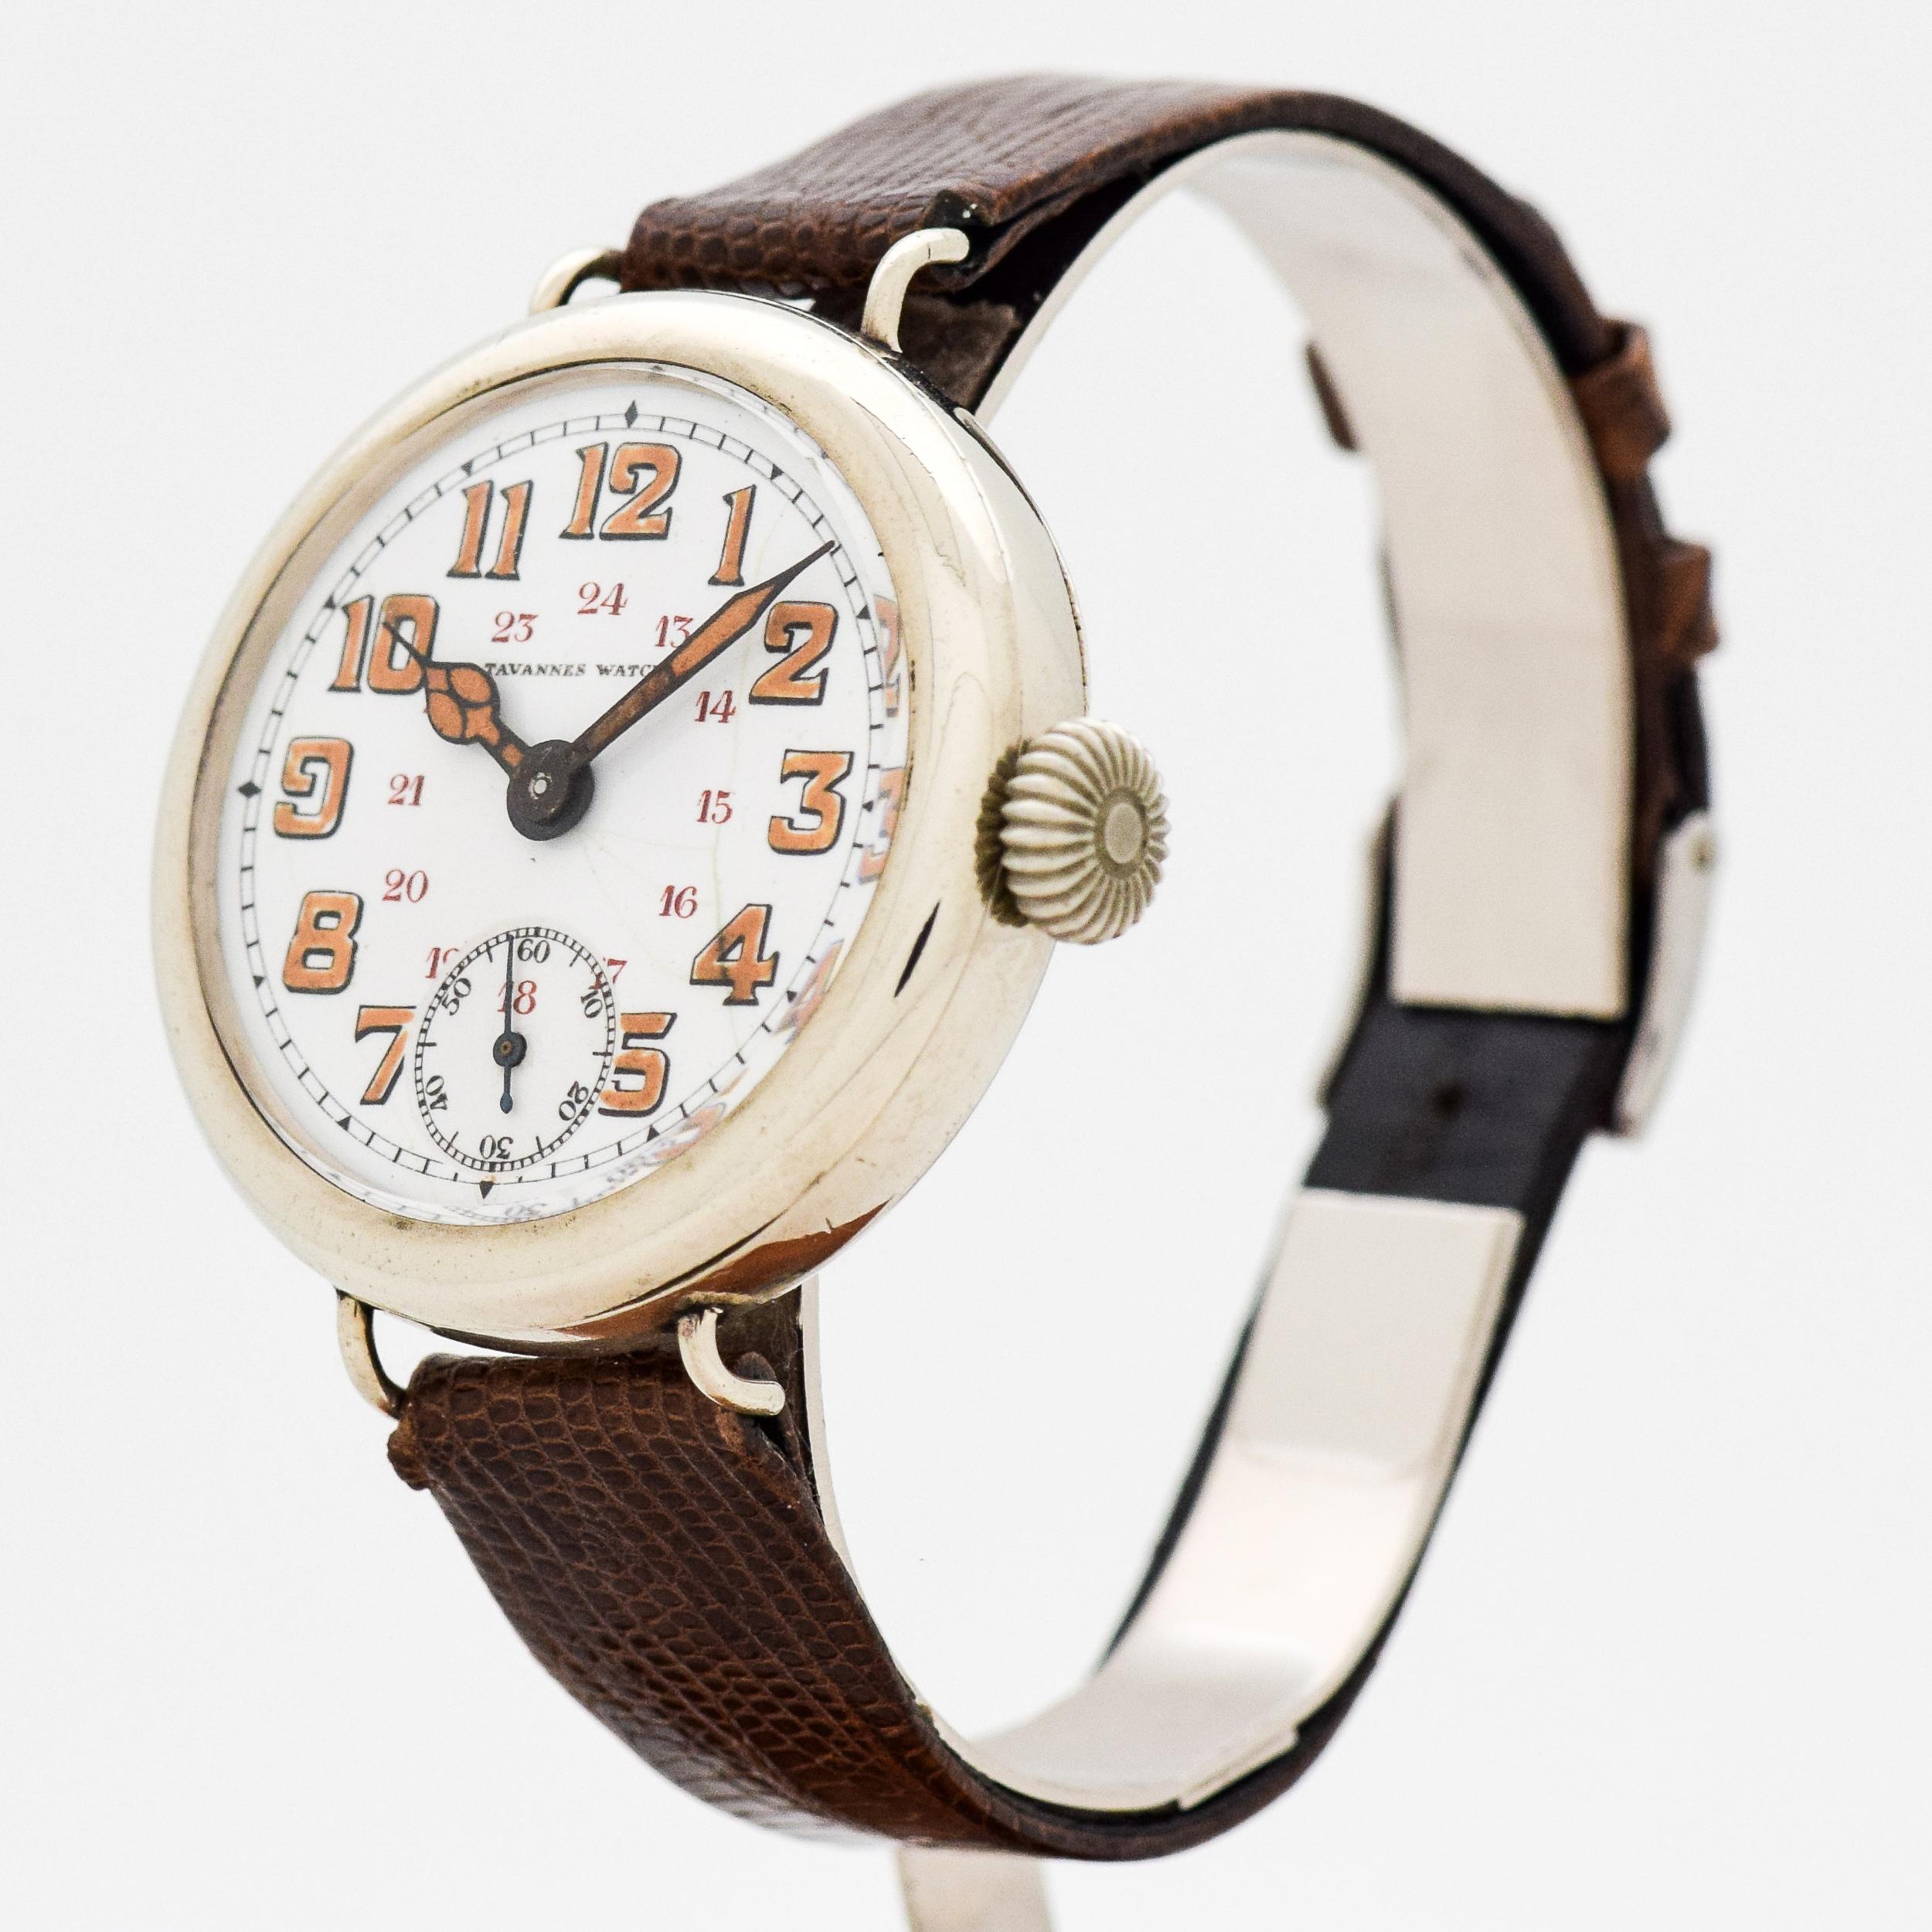 1910's Vintage Tavannes WWI Military Era Over Sized 37 mm Wide Chrome watch with Original White Enamel Dial with Brown Luminous Arabic Numbers. 37mm x 41mm lug to lug (1.46 in. x 1.61 in.). 11 jewel, manual-wind movement.